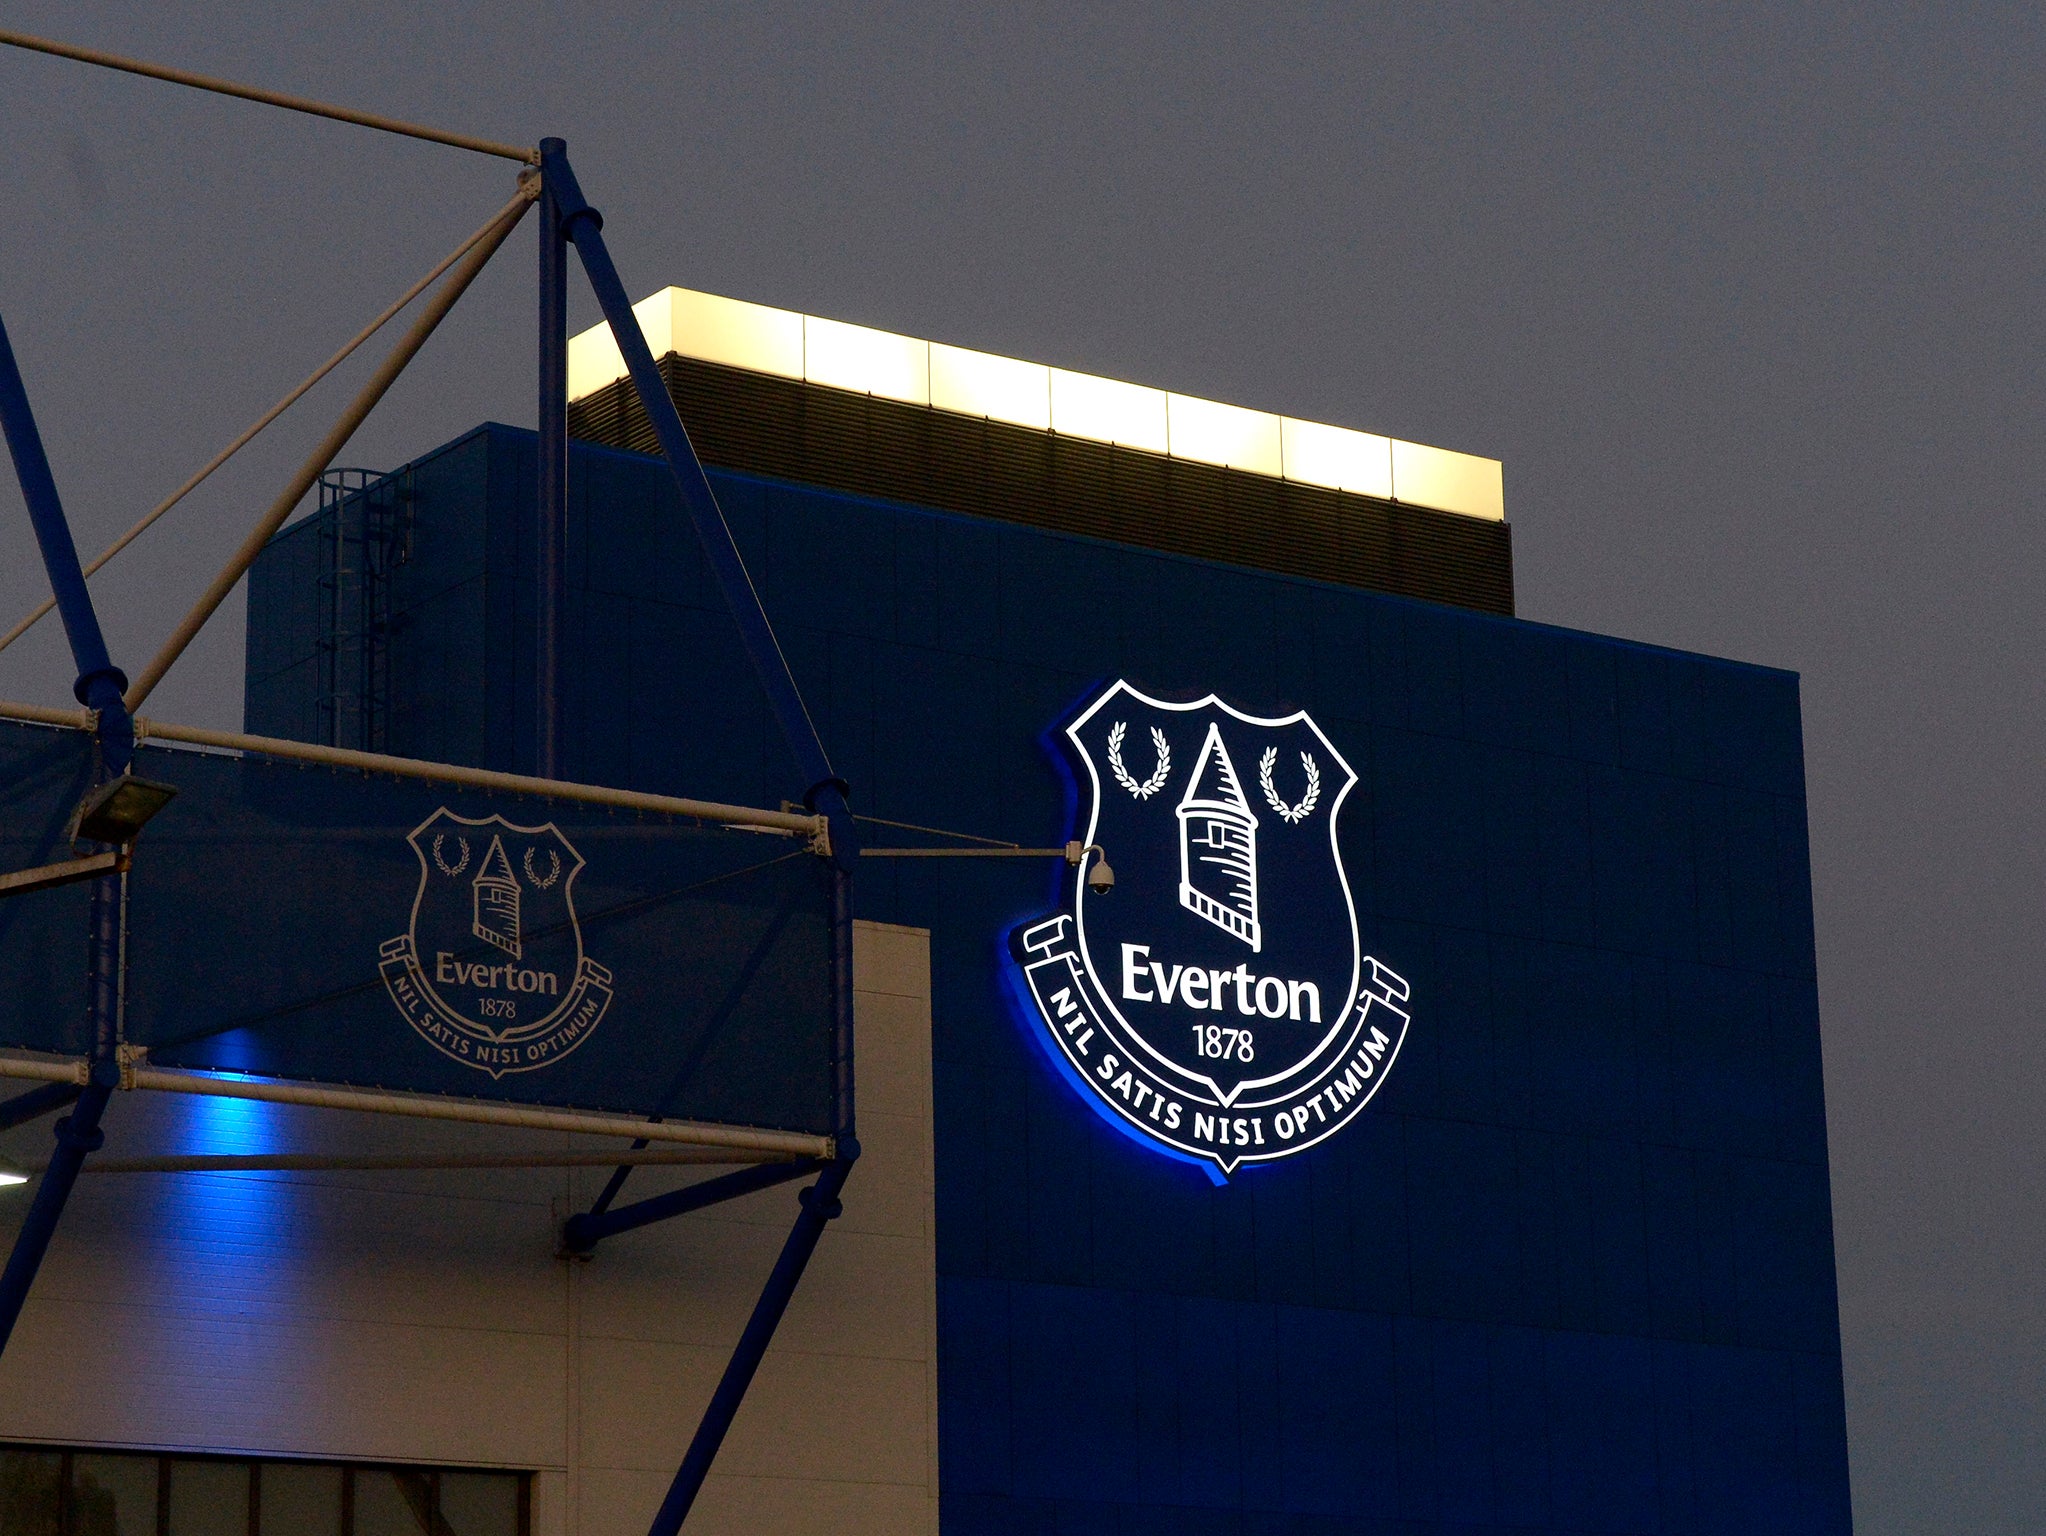 Goodison Park will host the game